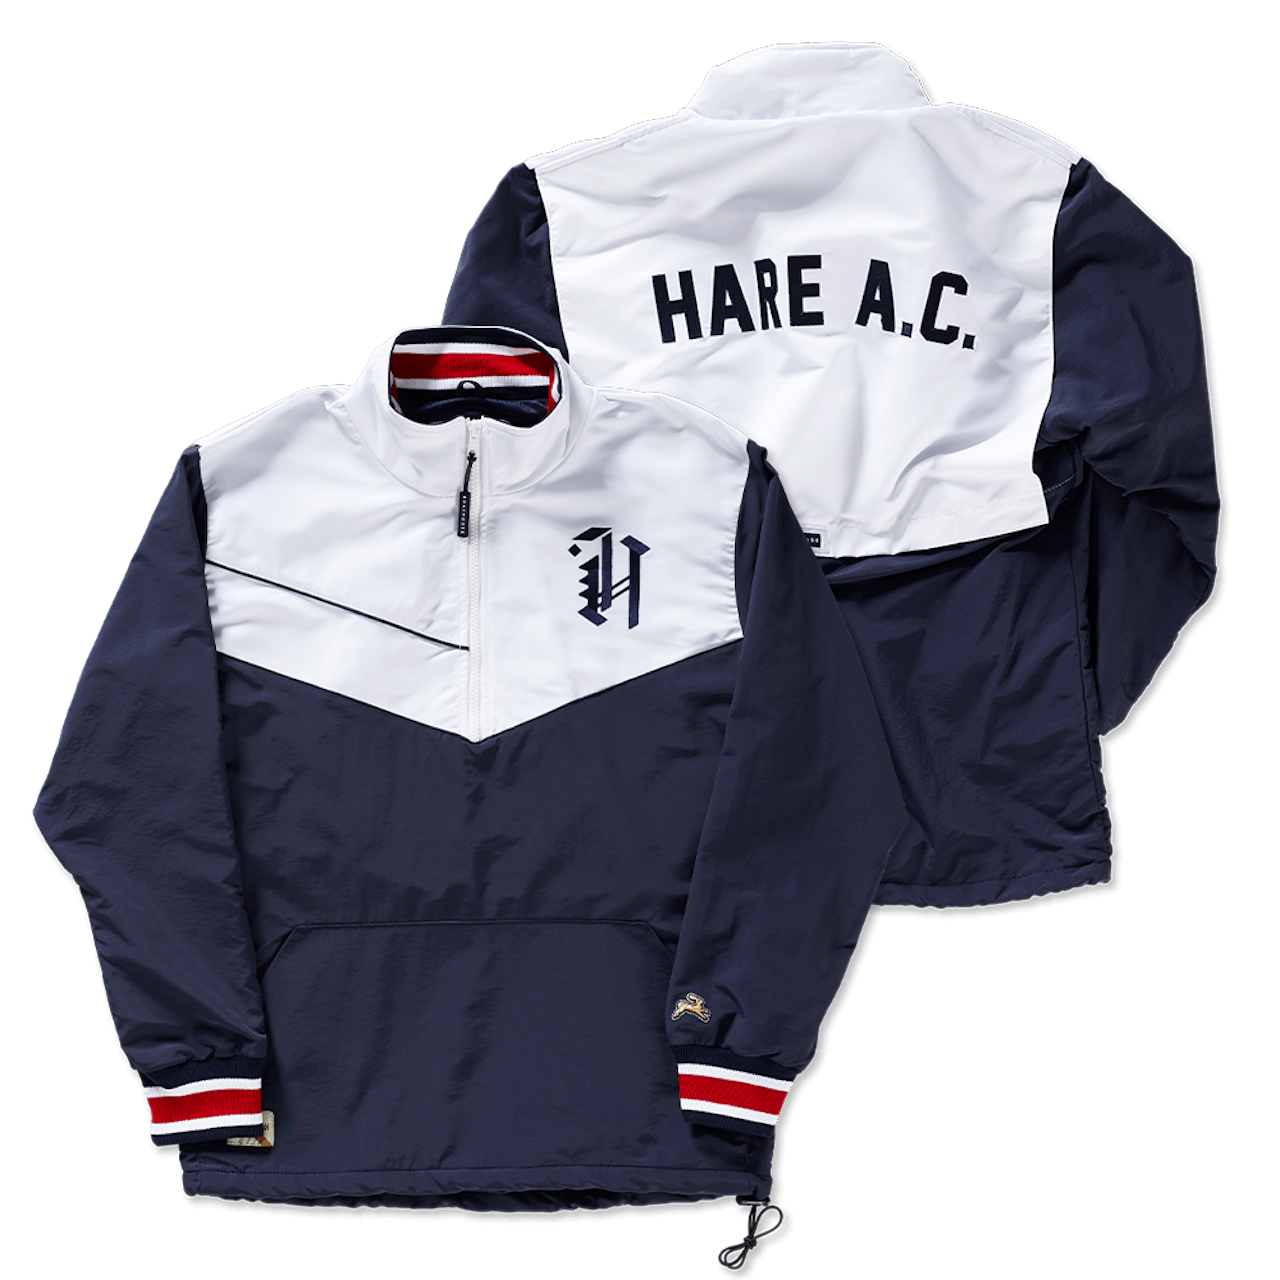 Hare A.C. / S / Jackets